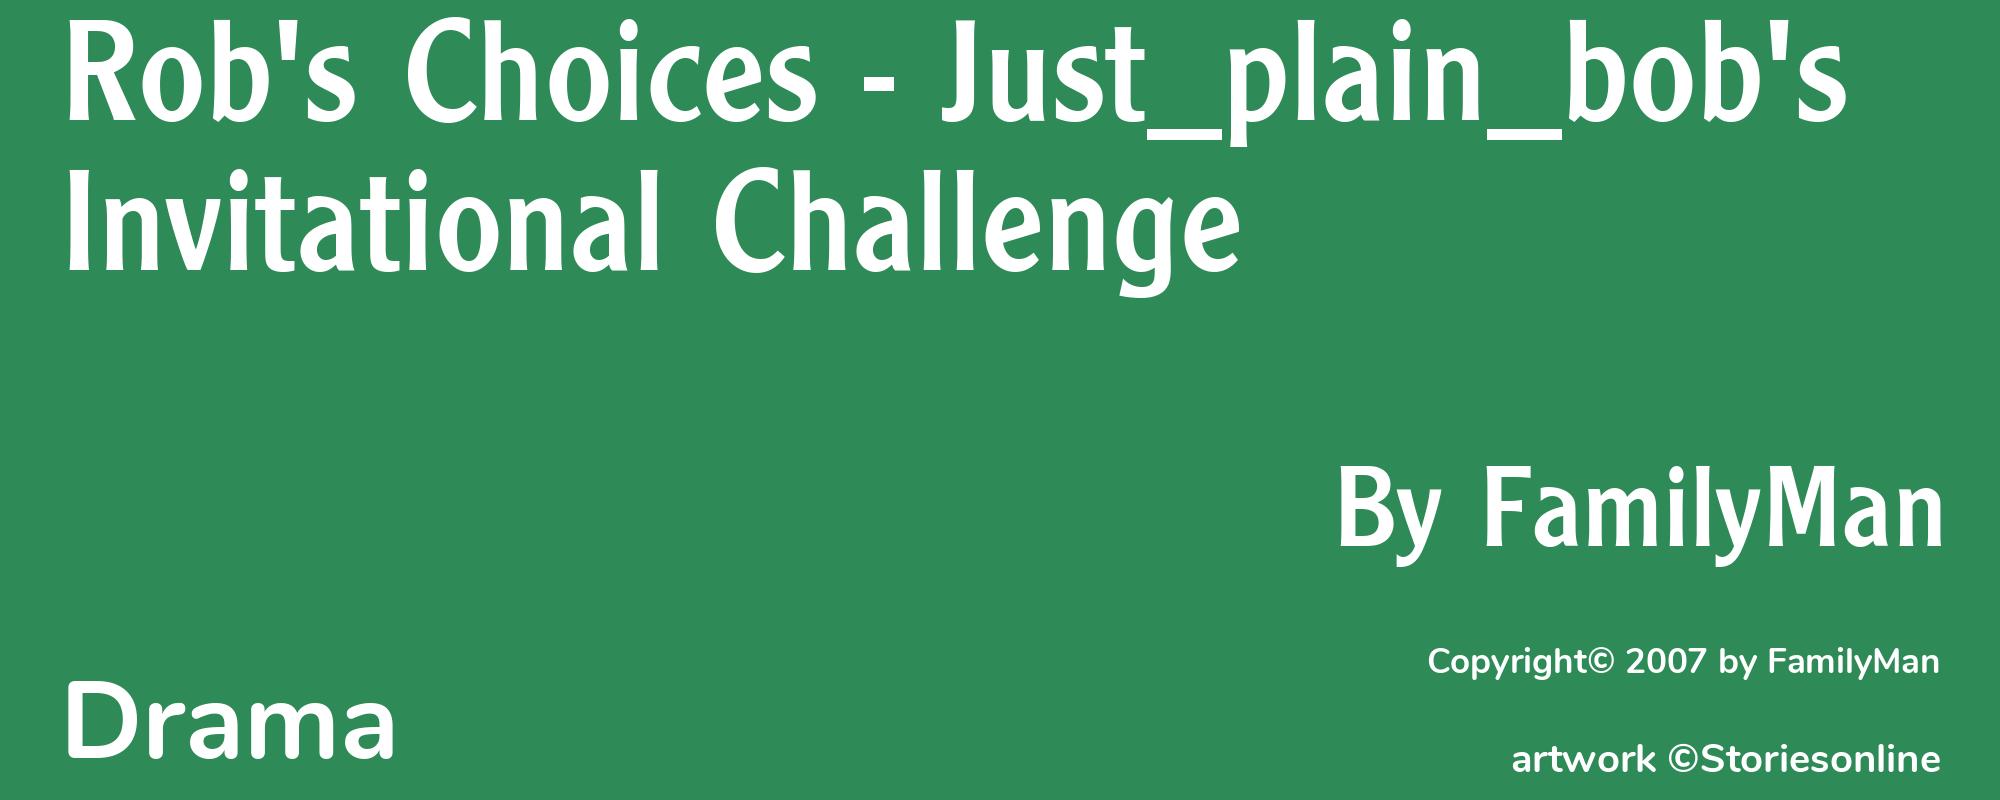 Rob's Choices - Just_plain_bob's Invitational Challenge - Cover